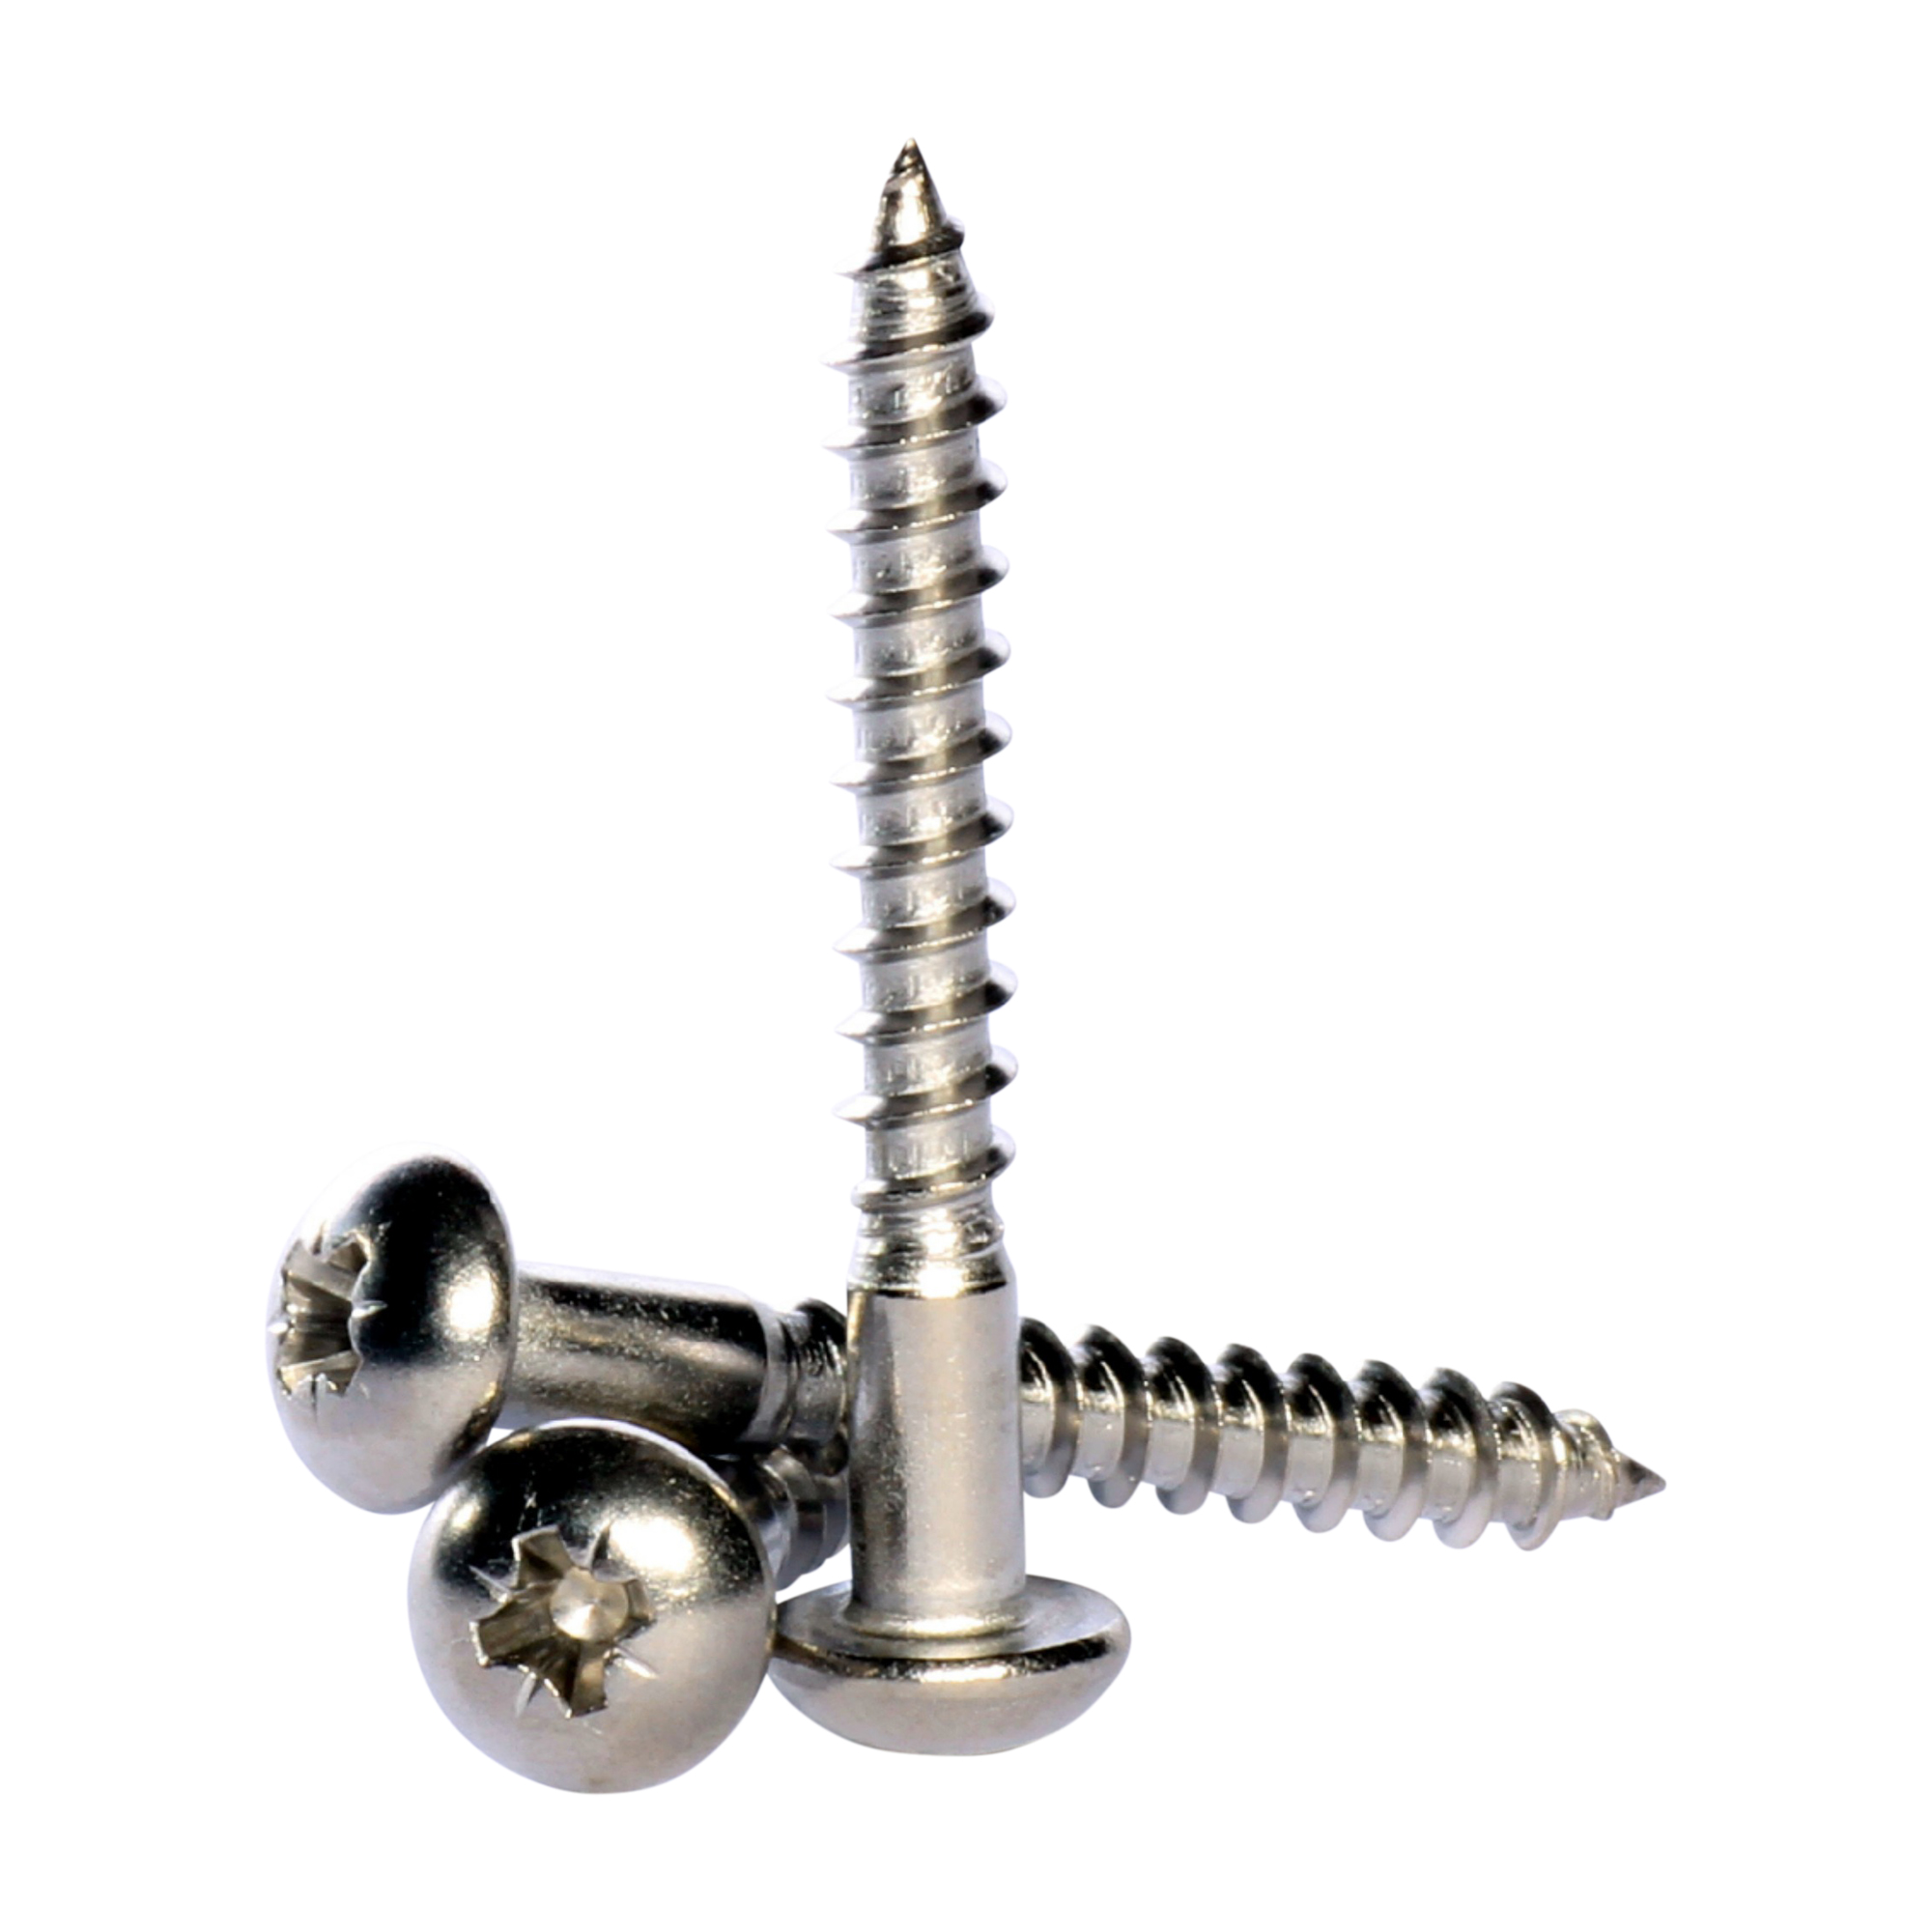 1¼/" X 8  BZP SLOTTED RAISED HEAD COUNTERSUNK WOOD SCREWS . qty 50